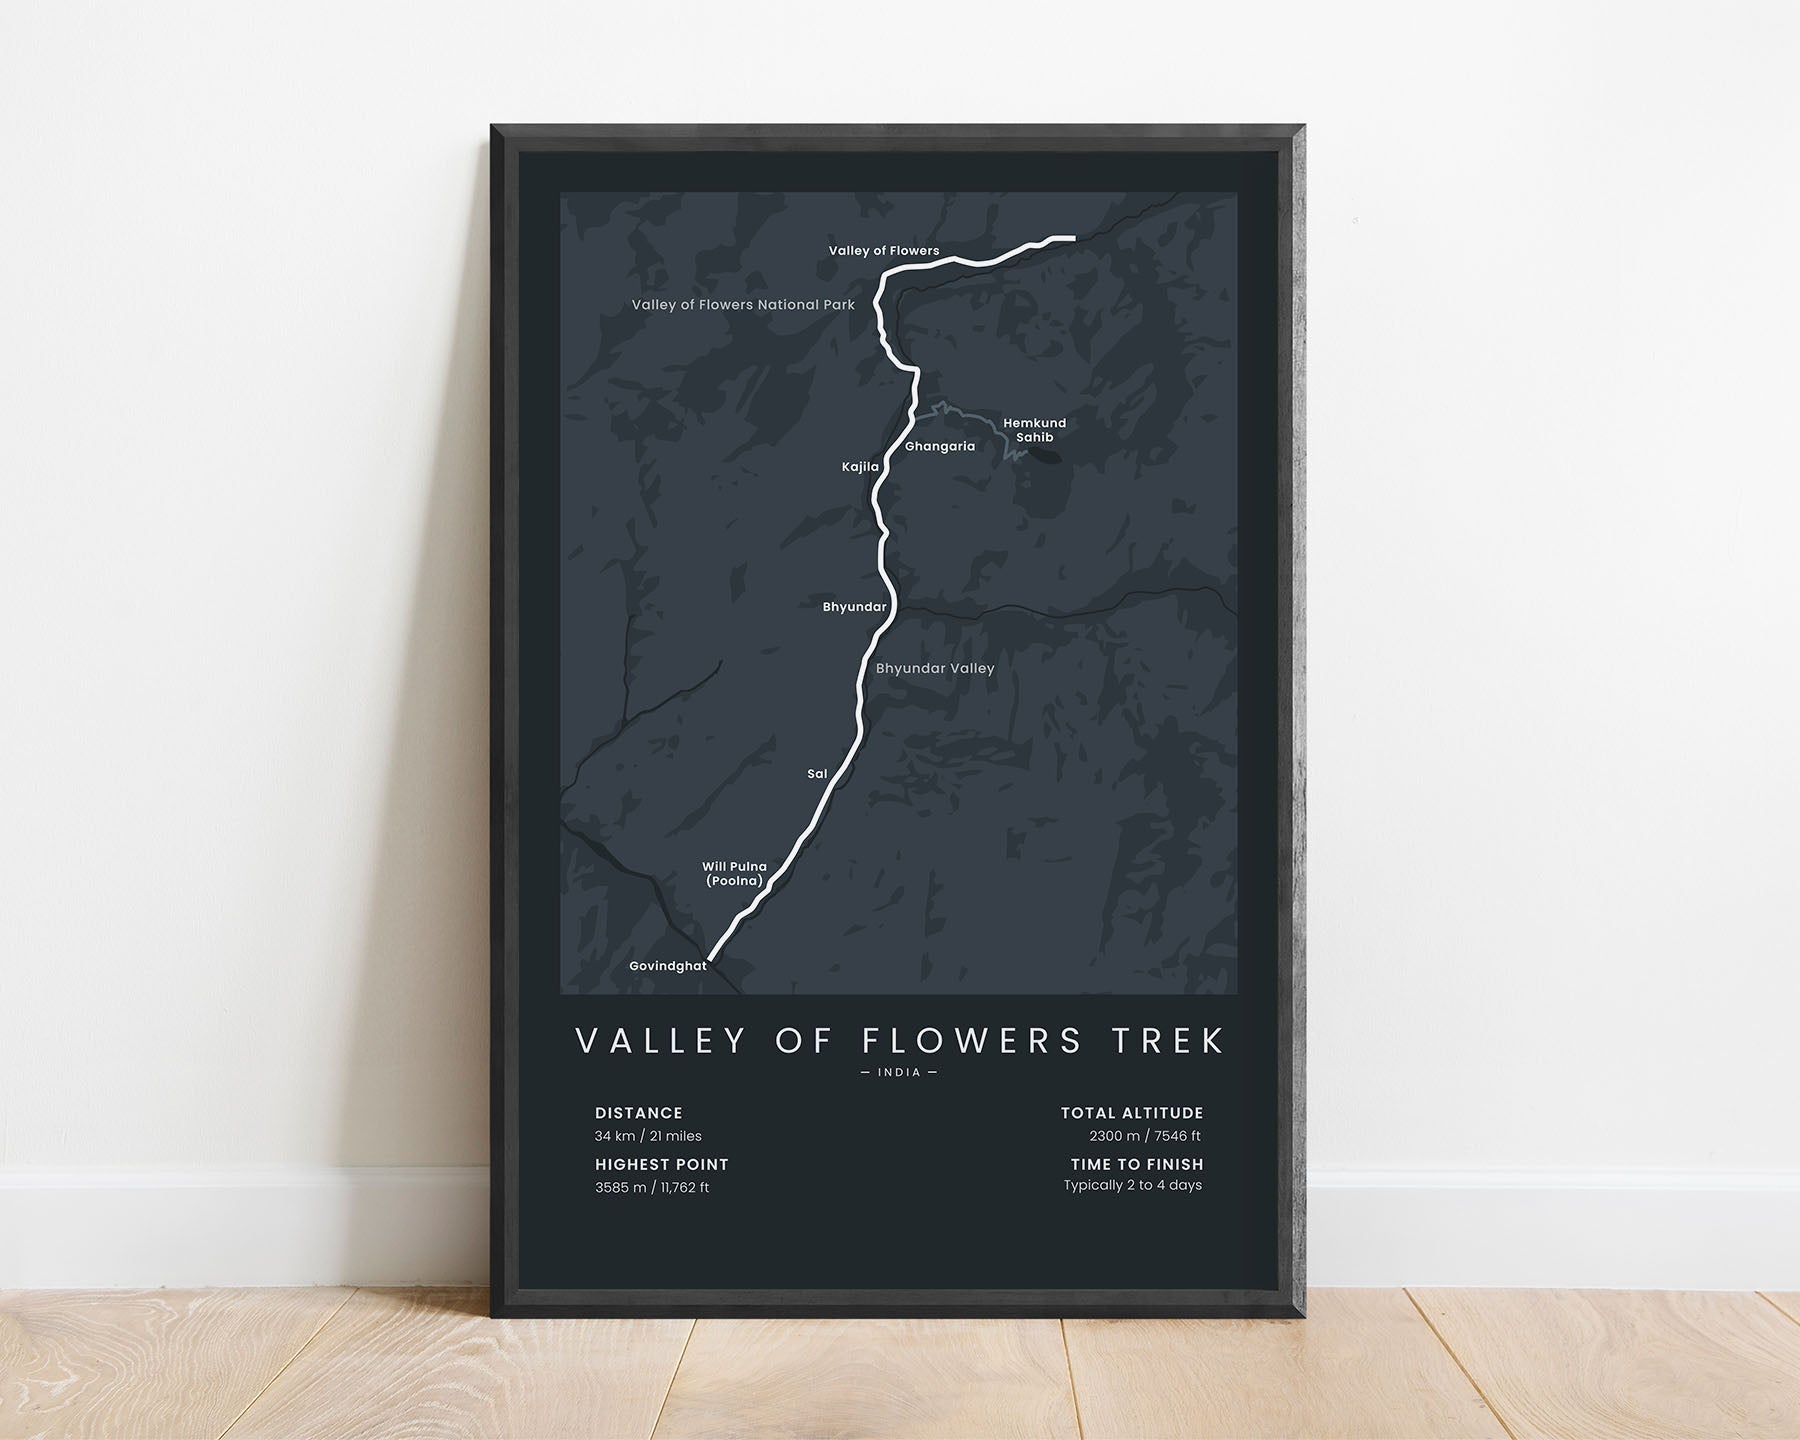 Valley of Flowers and Hemkund Sahib Trek (Valley of Flowers National Park) route map art with black background